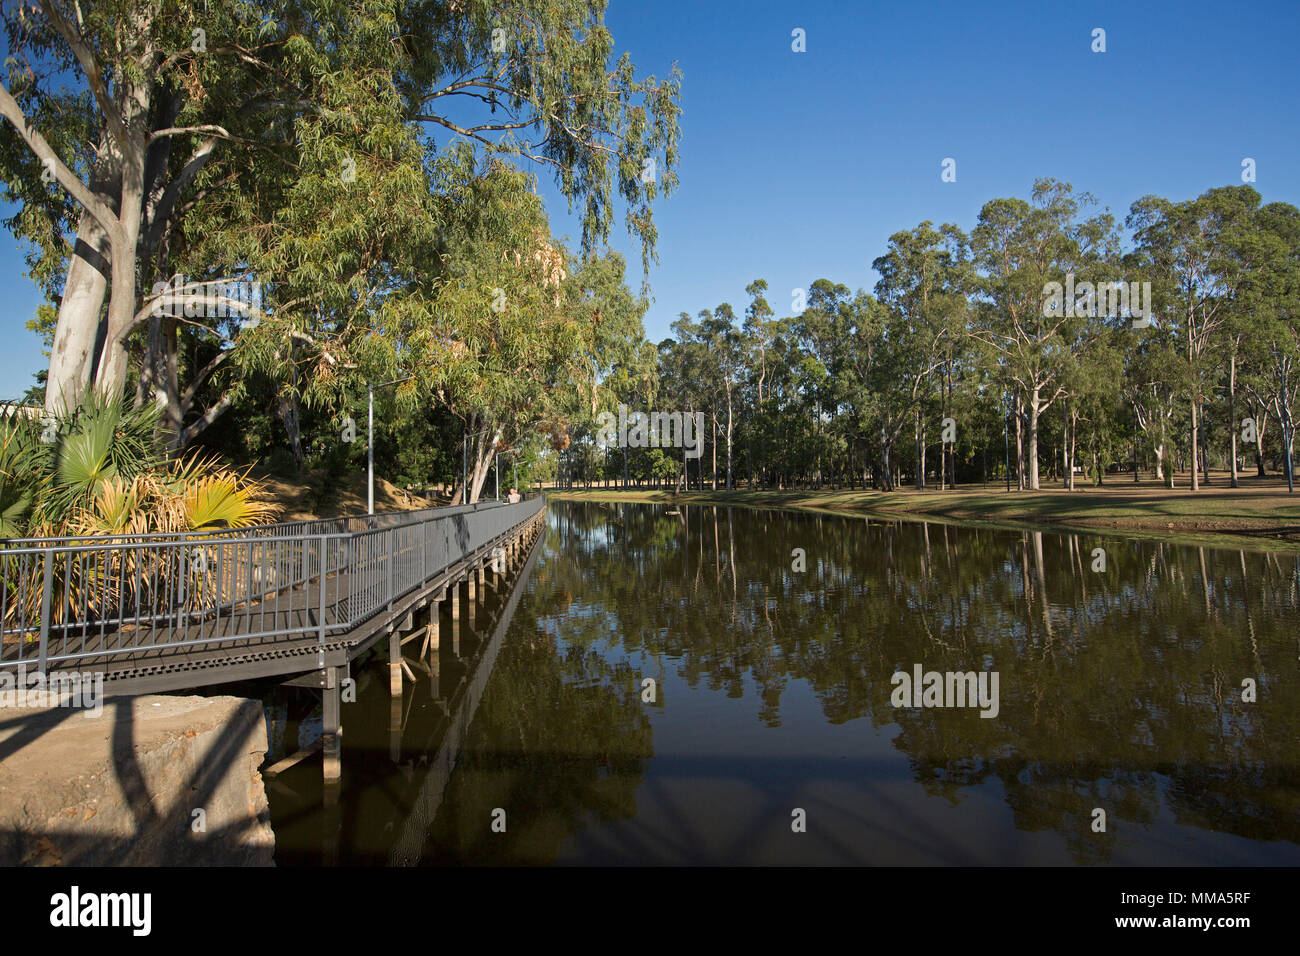 Picturesque landscape at Hood's Lagoon with surrounding trees of parklands & blue sky reflected in calm water at Clermont outback Queensland Australia Stock Photo